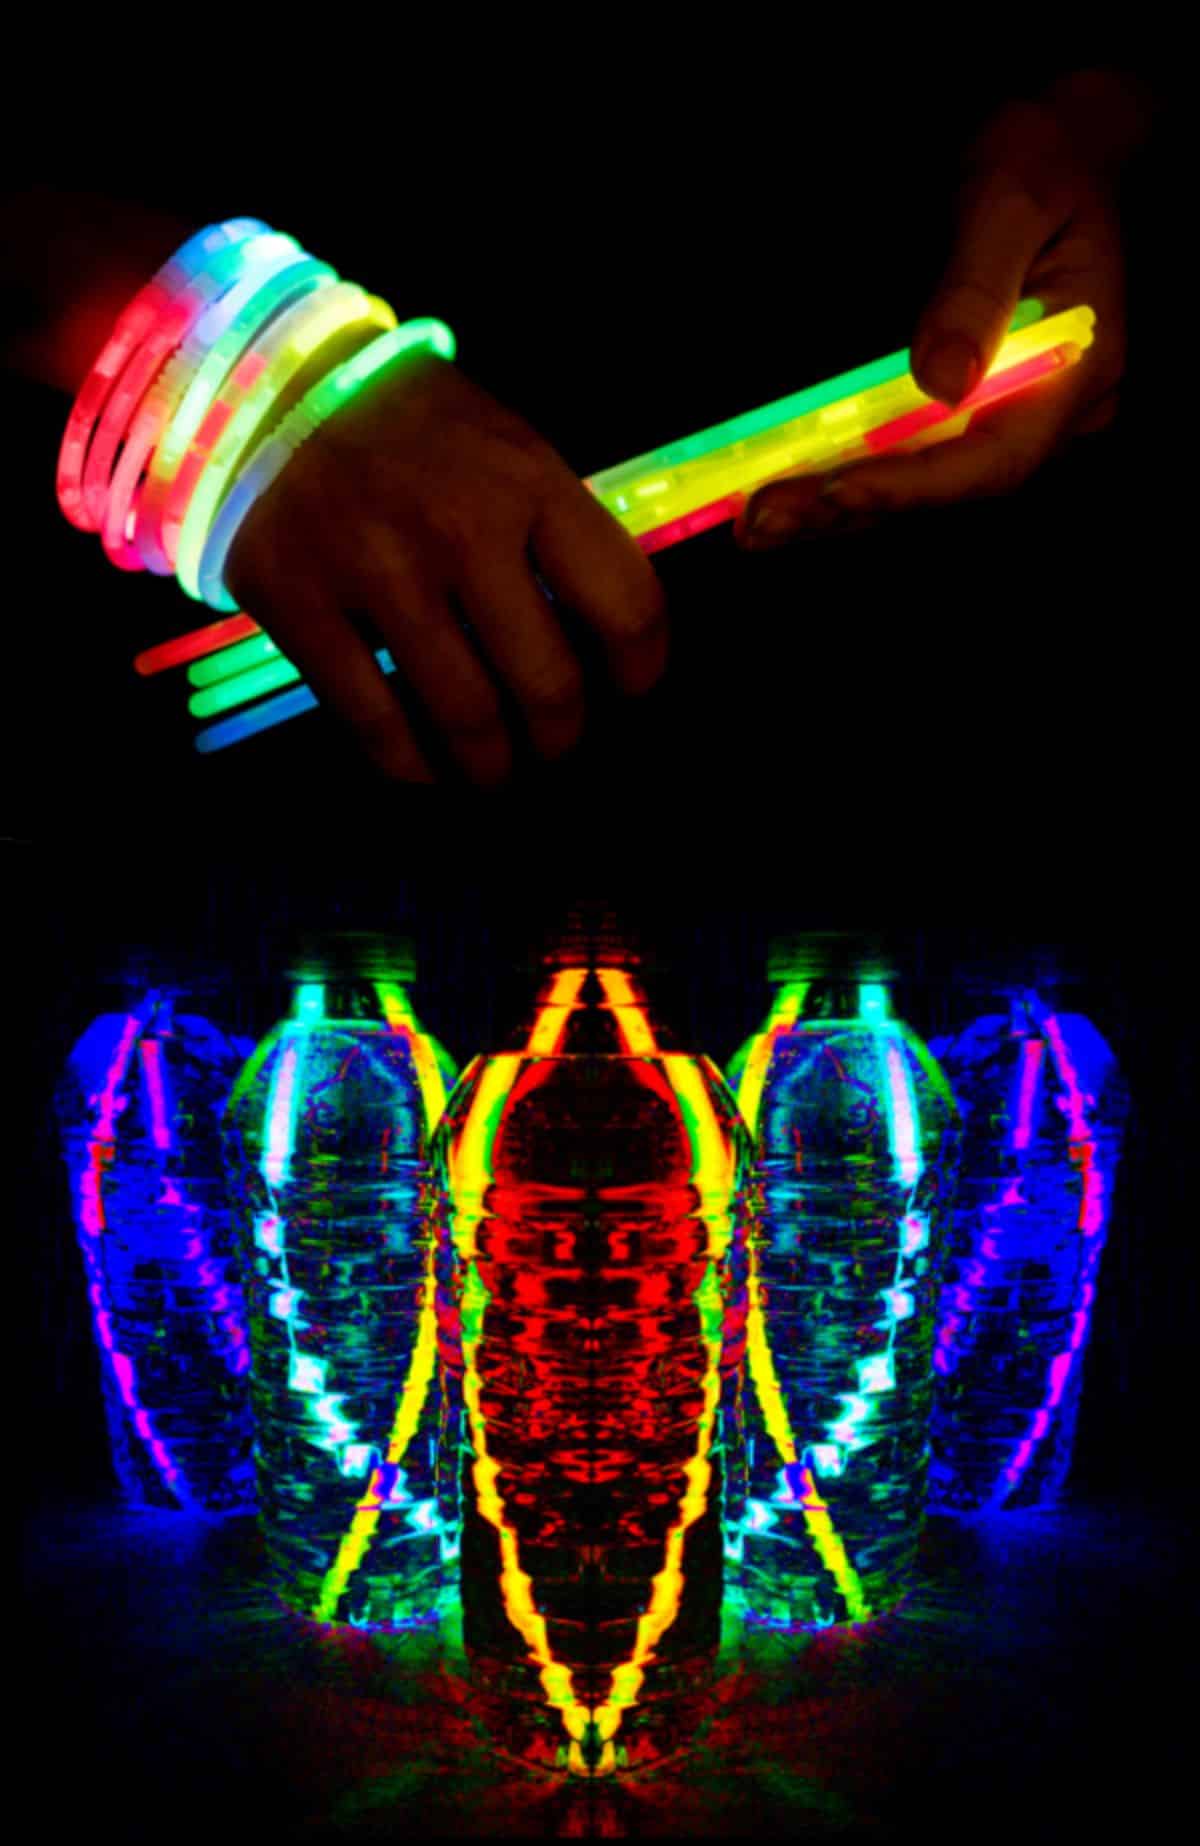 Hands holding and wearing glowing sticks and glowing sticks in bottles glowing in the dark.